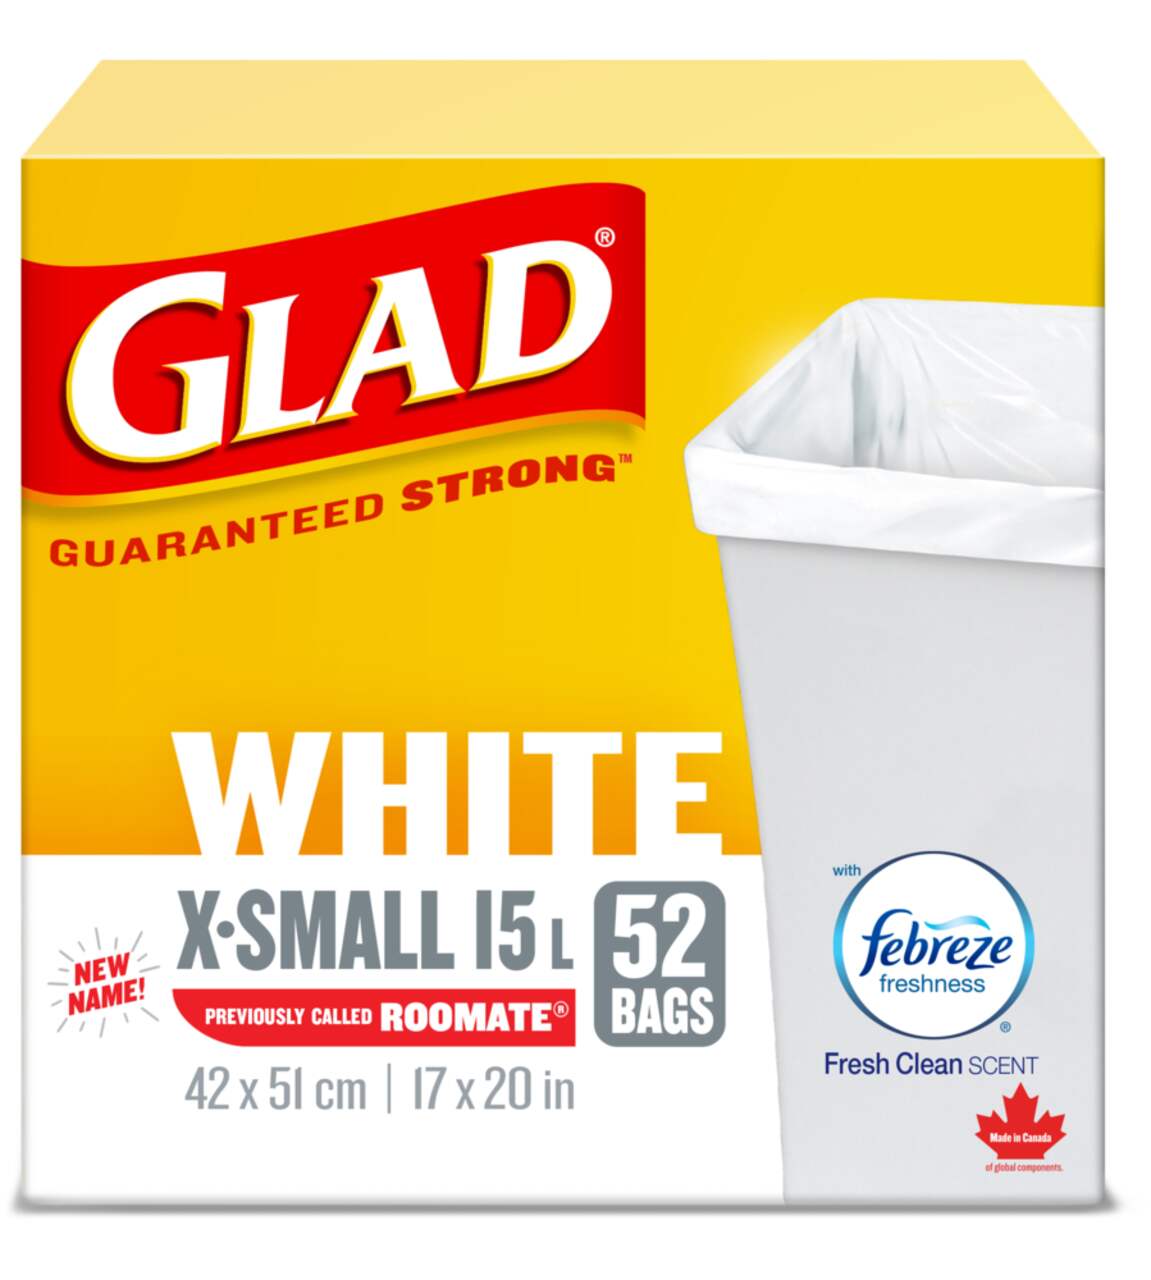 https://media-www.canadiantire.ca/product/living/cleaning/refuse-bags/0429737/glad-white-kitchen-garbage-bags-52pk-15l-83cfd5da-1eaf-46b6-a5aa-5aa5d6203815.png?imdensity=1&imwidth=1244&impolicy=mZoom